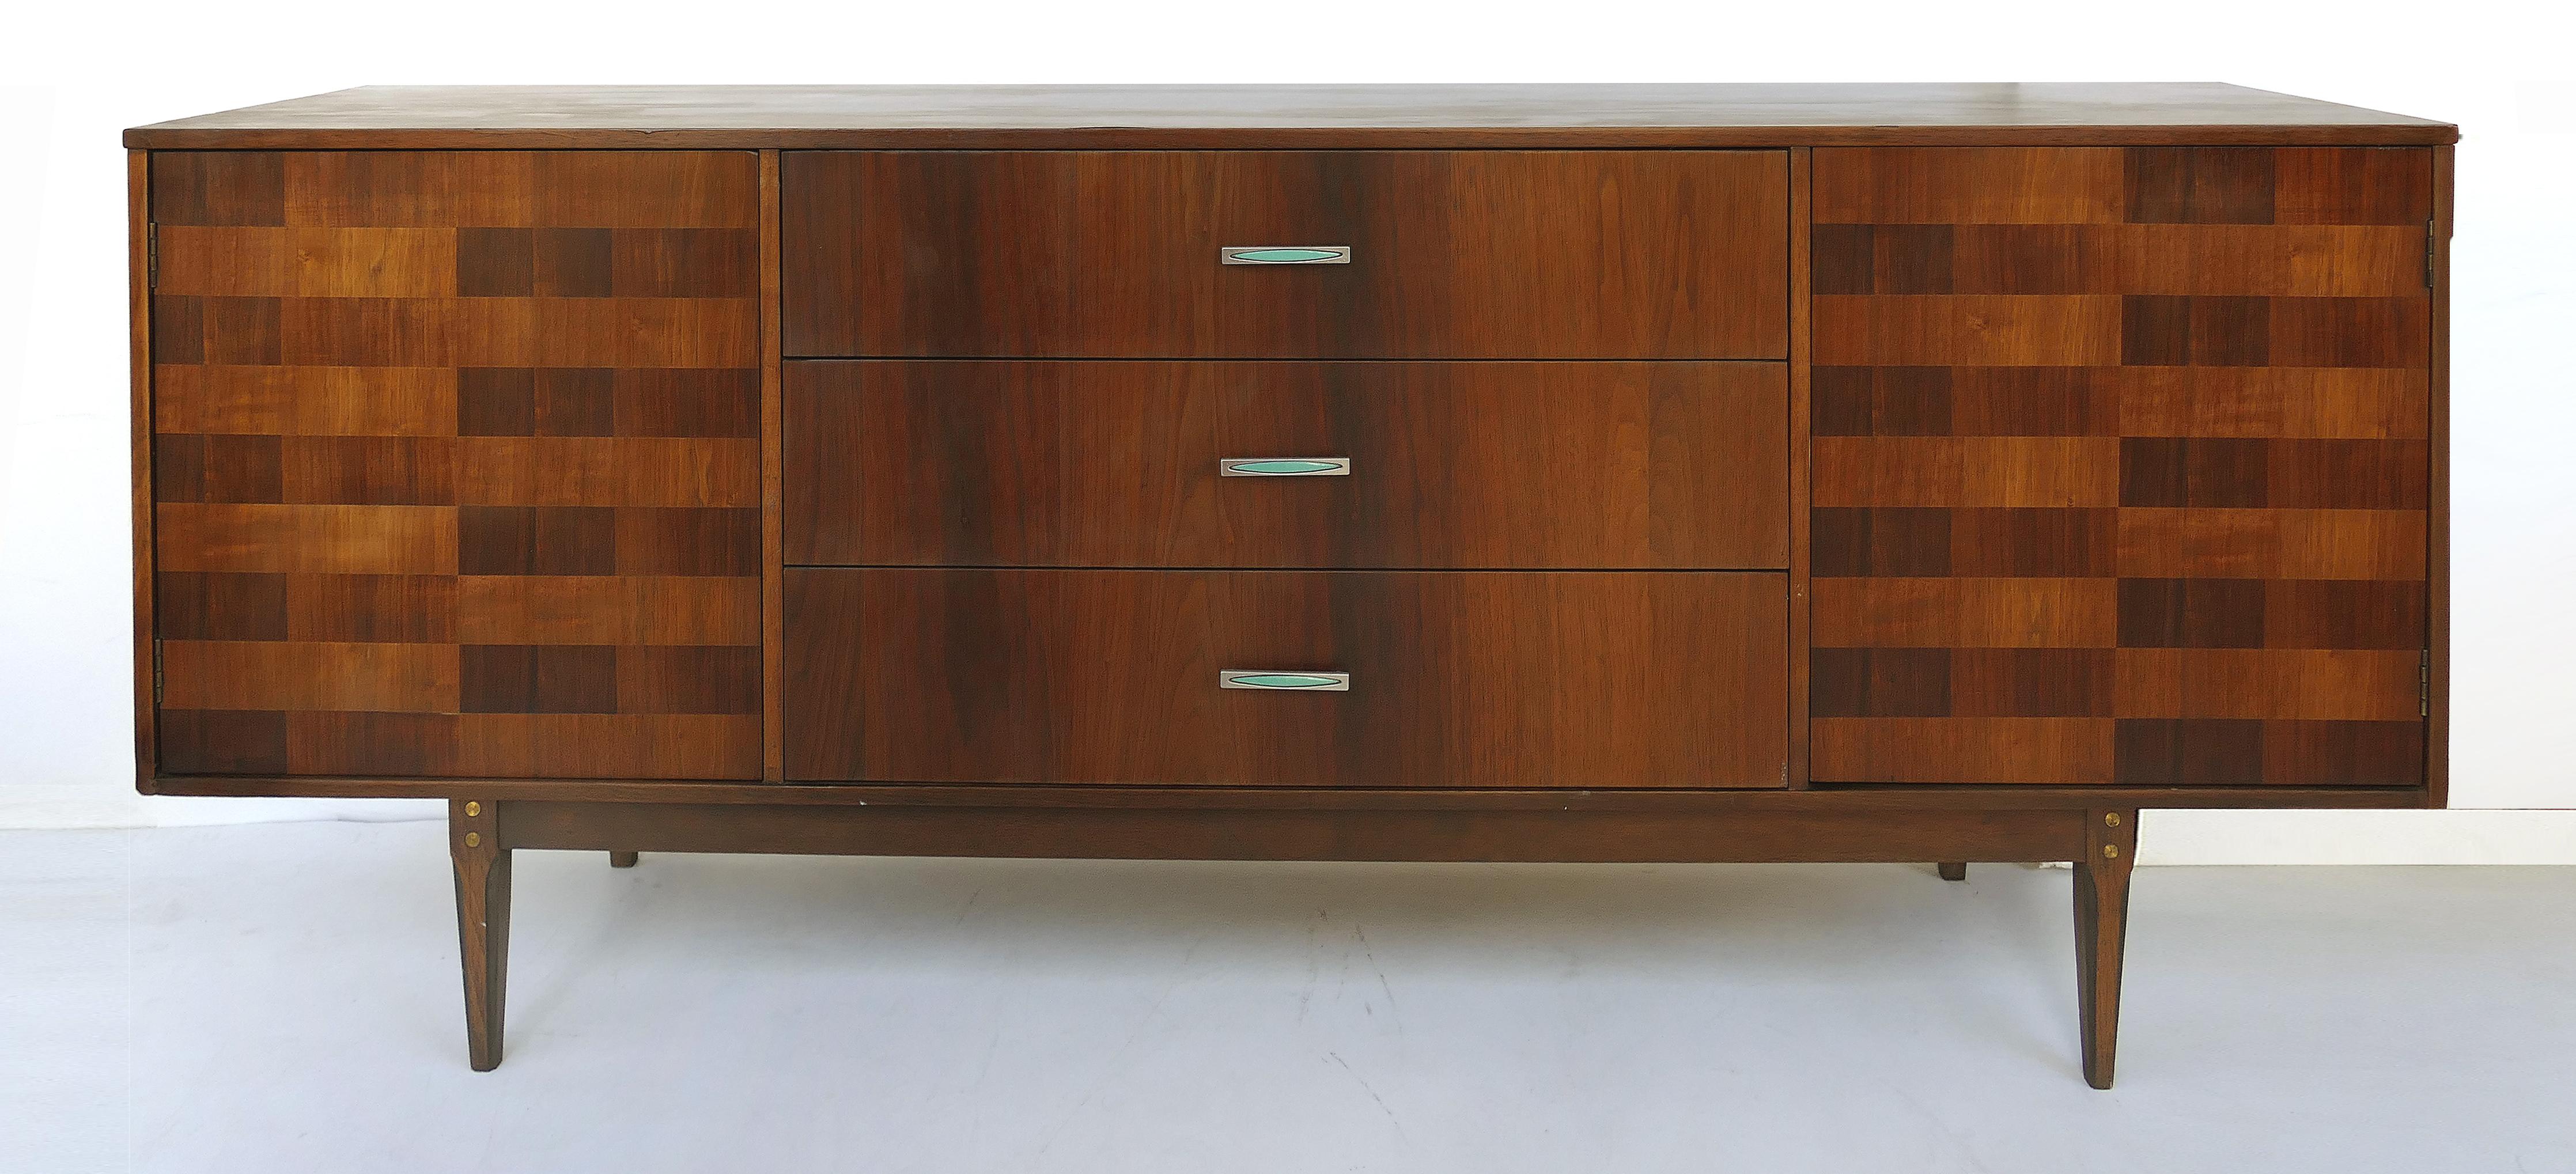 Kroehler custom crafted credenza with rosewood inlays and enameled brass hardware

Offered for sale is a fine Kroehler custom-crafted credenza with rosewood inlays and wonderful enameled brass hardware. The three central drawers are flanked by two